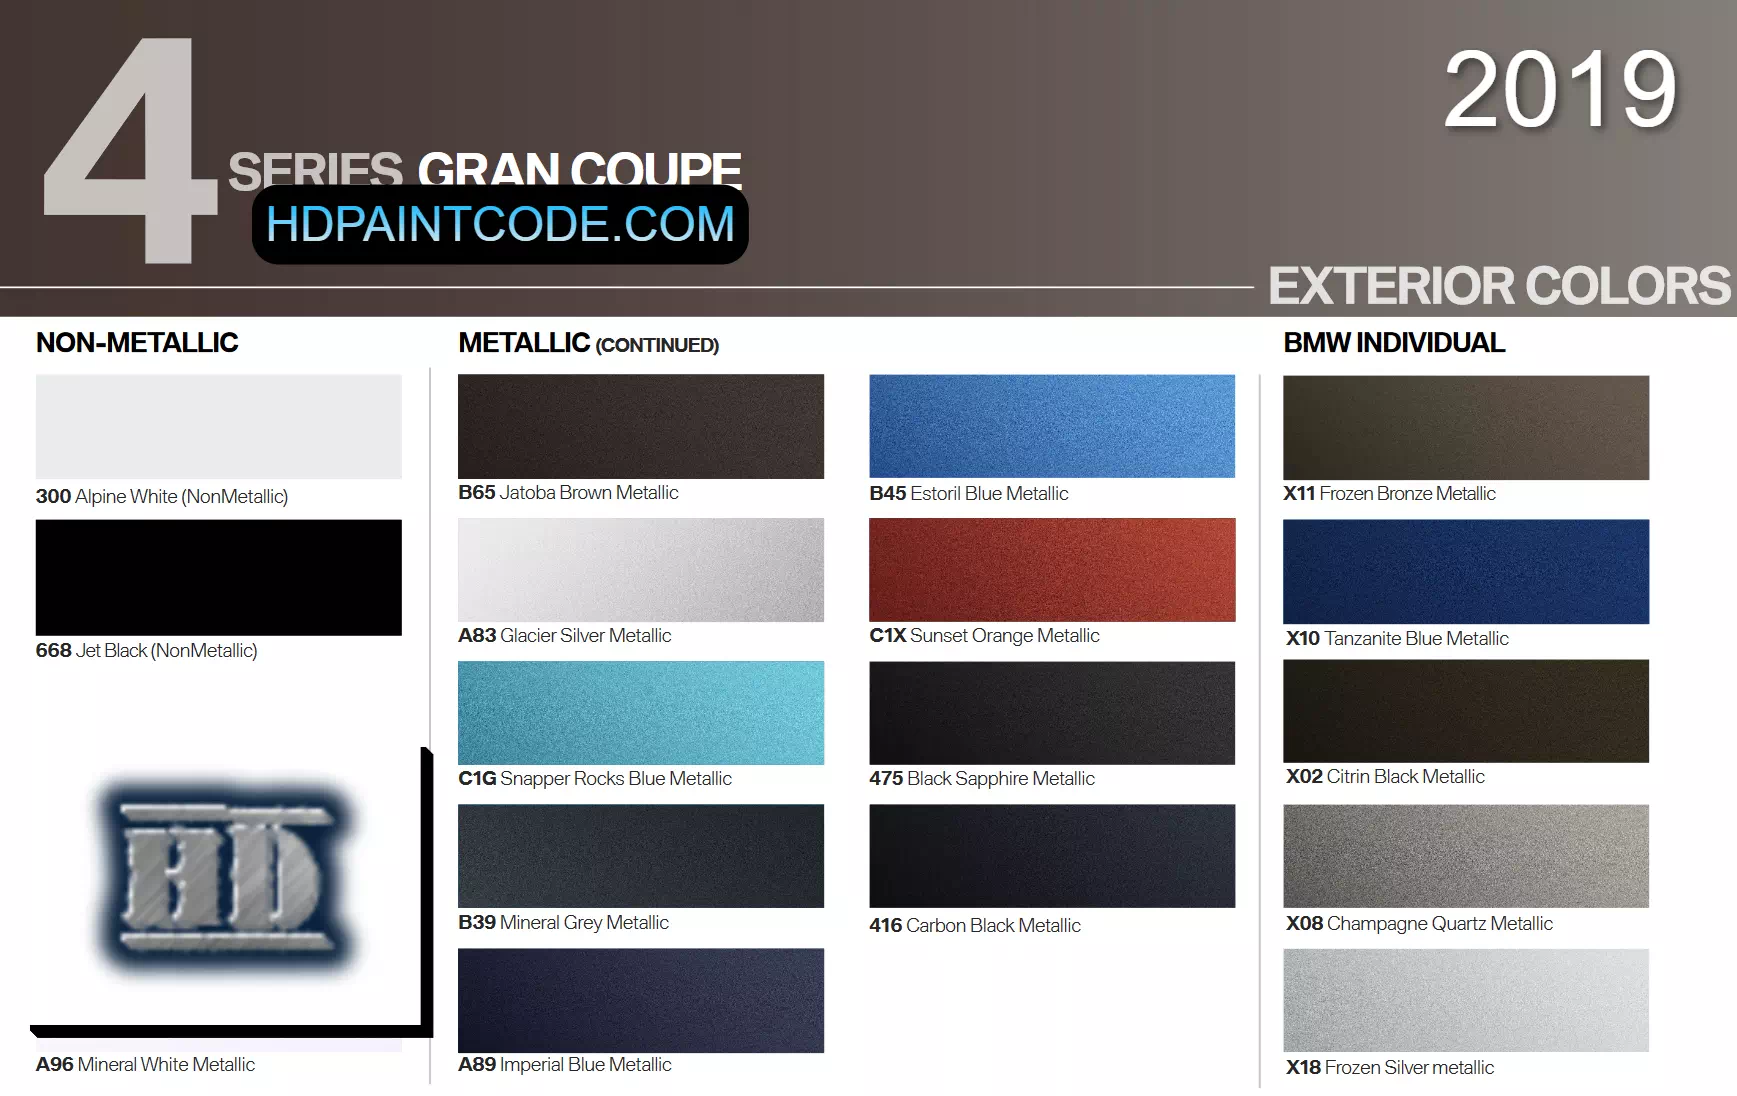 Paint Codes and Color Swatches for the 2019 BMW 4 Series Grand Coupe